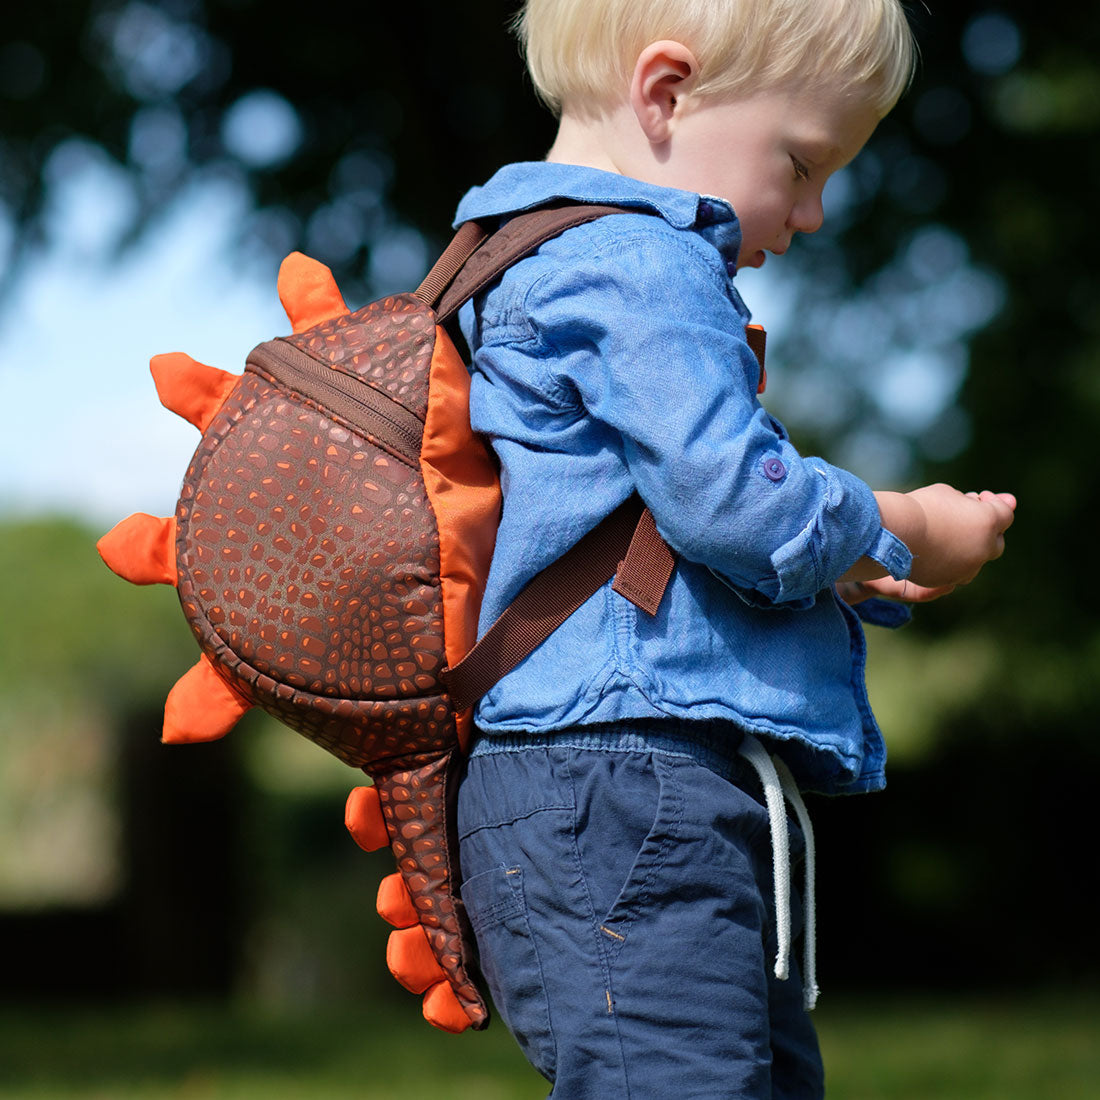 Frantic Premium Quality Soft design PU Sky Dinosaur Bag for Kids 14 Inches  Online in India, Buy at Best Price from Firstcry.com - 14713070